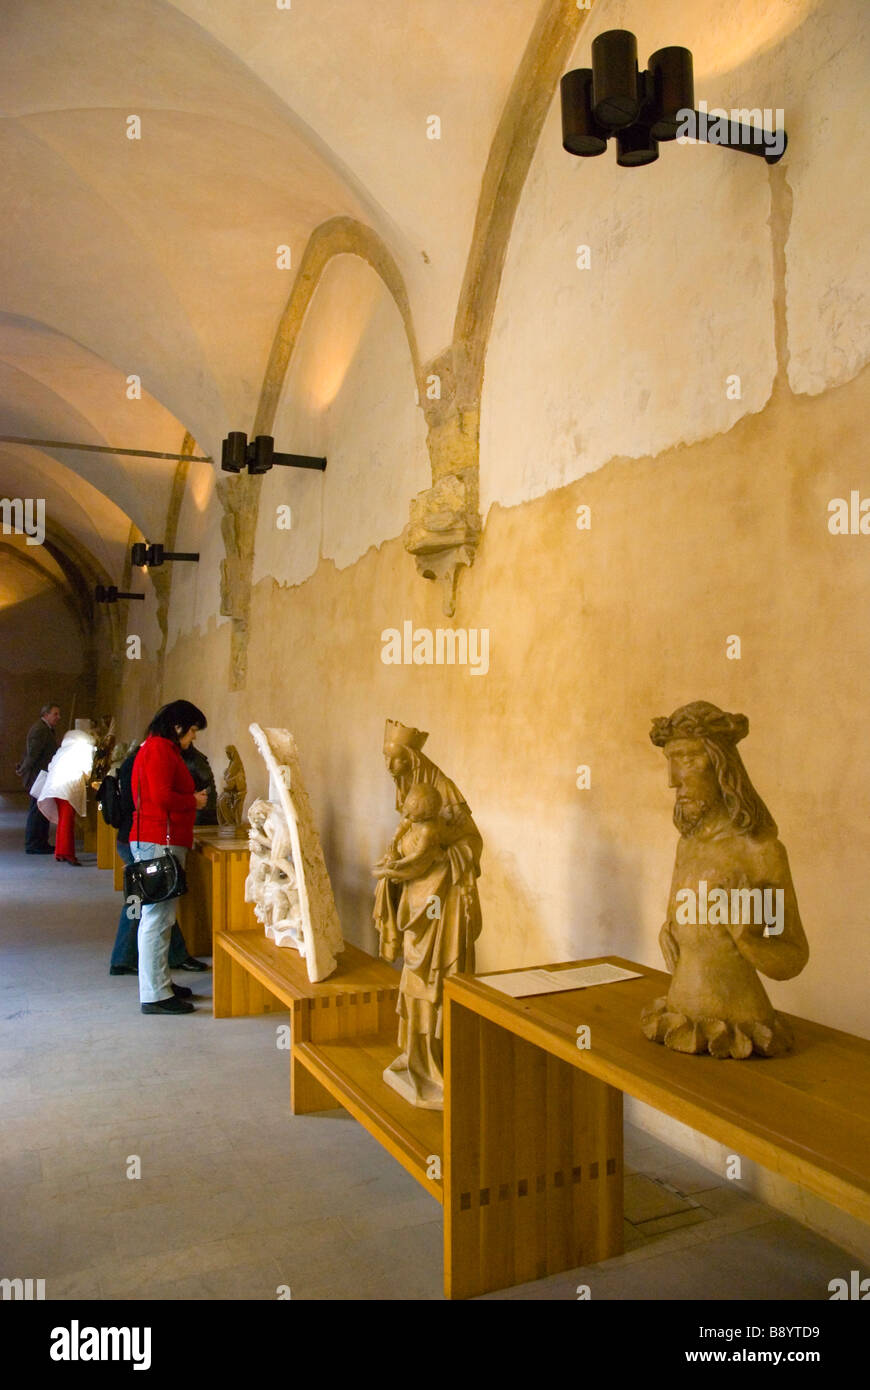 Exhibition inside Anezky klaster the St Agnes monastery in Prague Czech Republic Europe Stock Photo